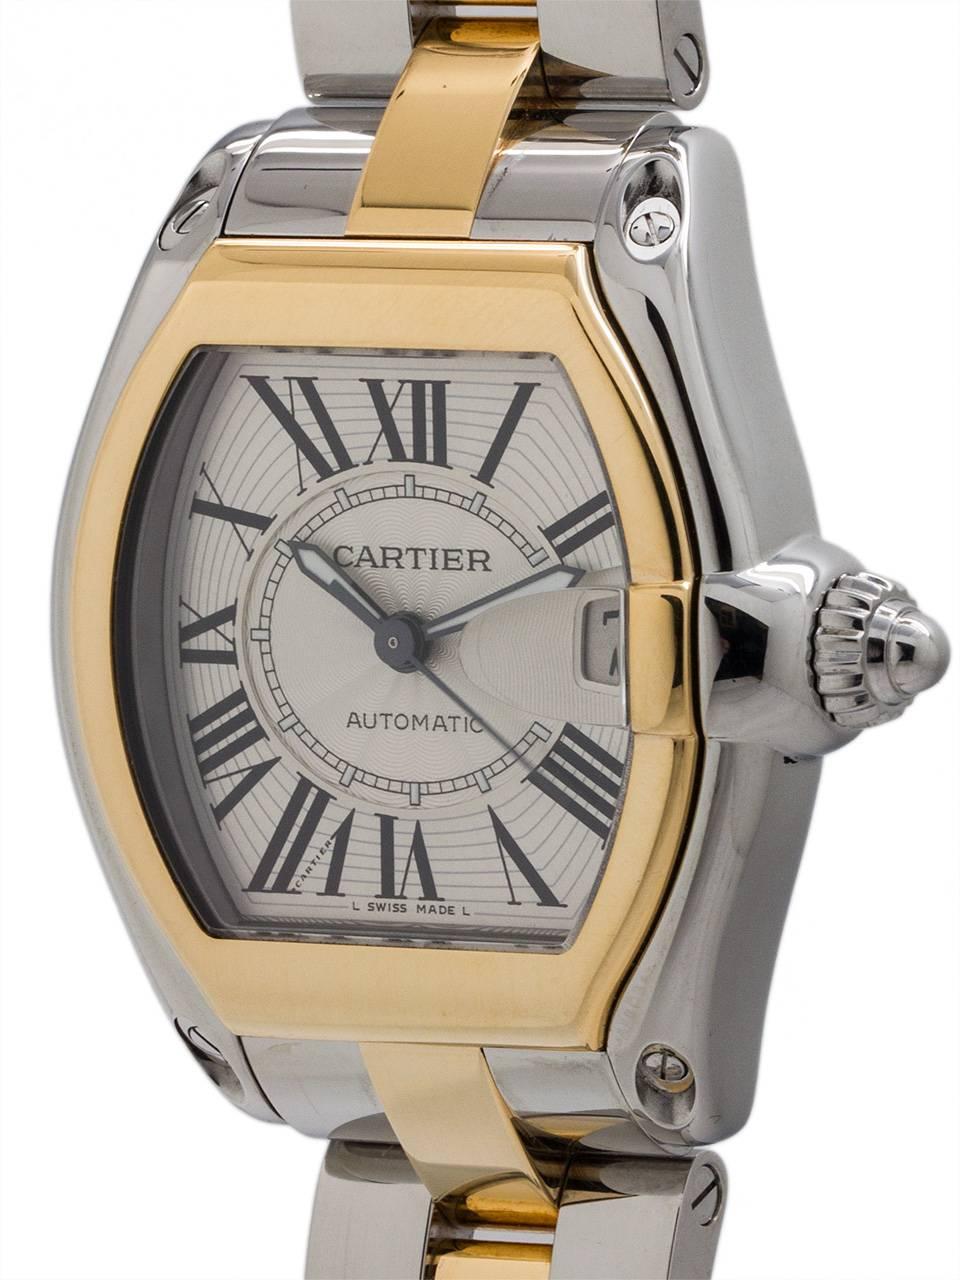 
Cartier Man’s Roadster automatic model ref# W62026Y4 circa 2000s. Featuring 38 x 44.5mm tonneau shaped stainless steel and 18K YG case with steel cabochon style screw down crown, matte silver textured dial with black stretch Roman numerals, and